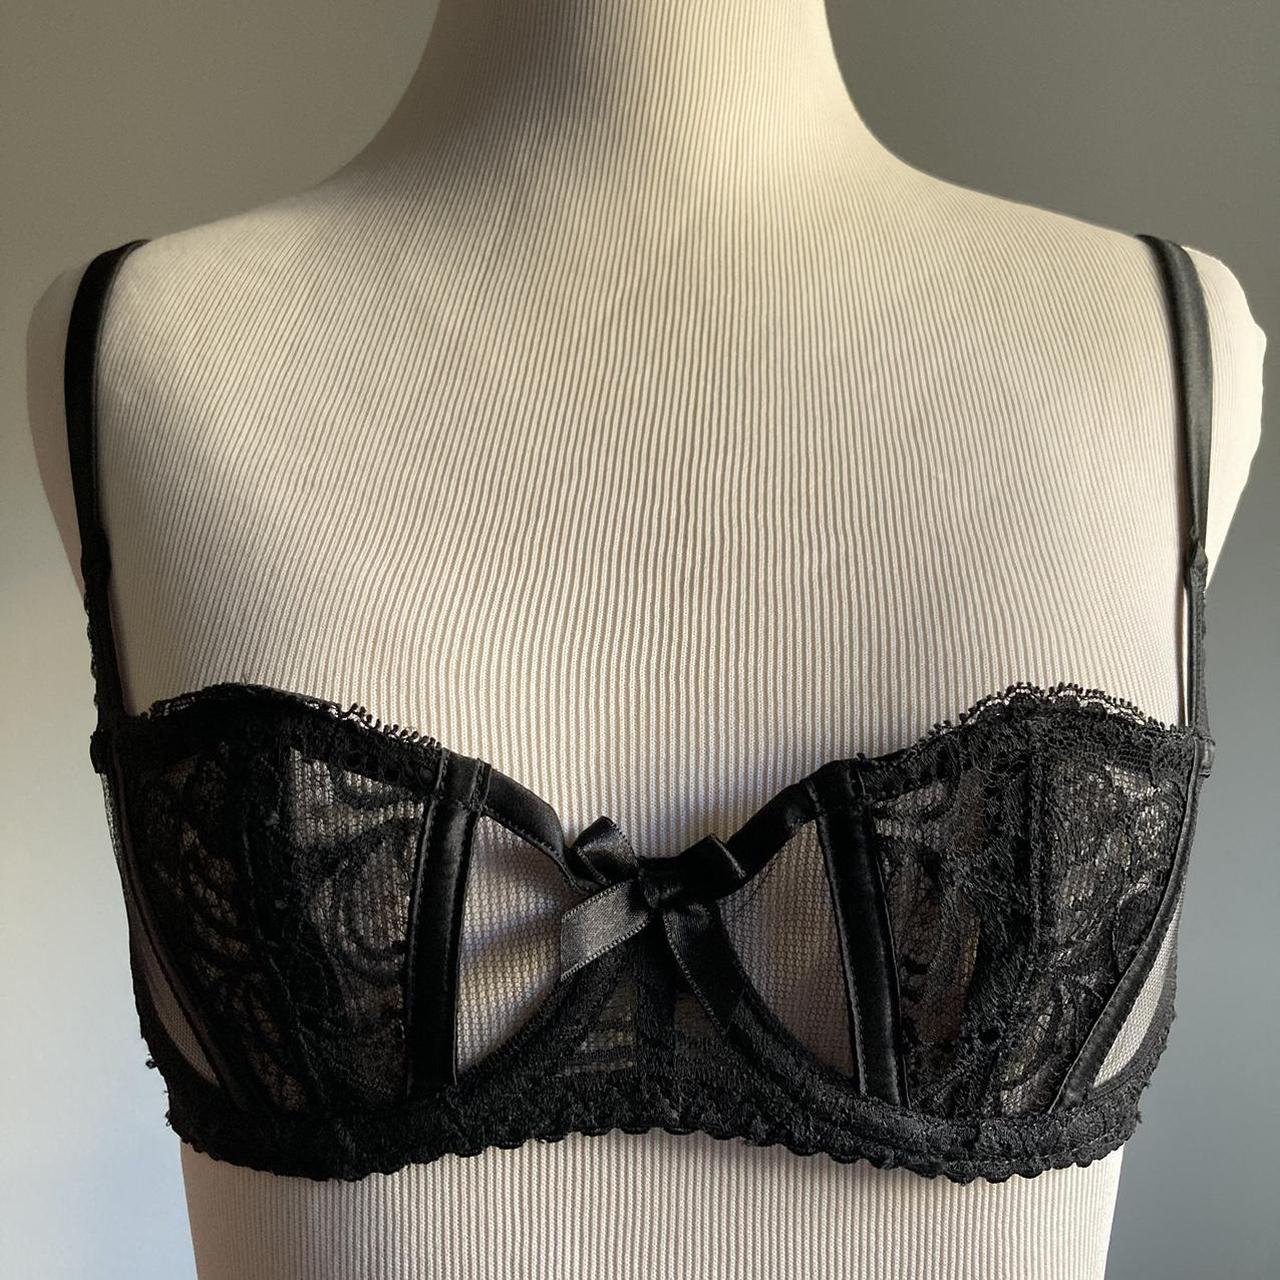 Agent Provocateur, Preloved & Secondhand Fashion